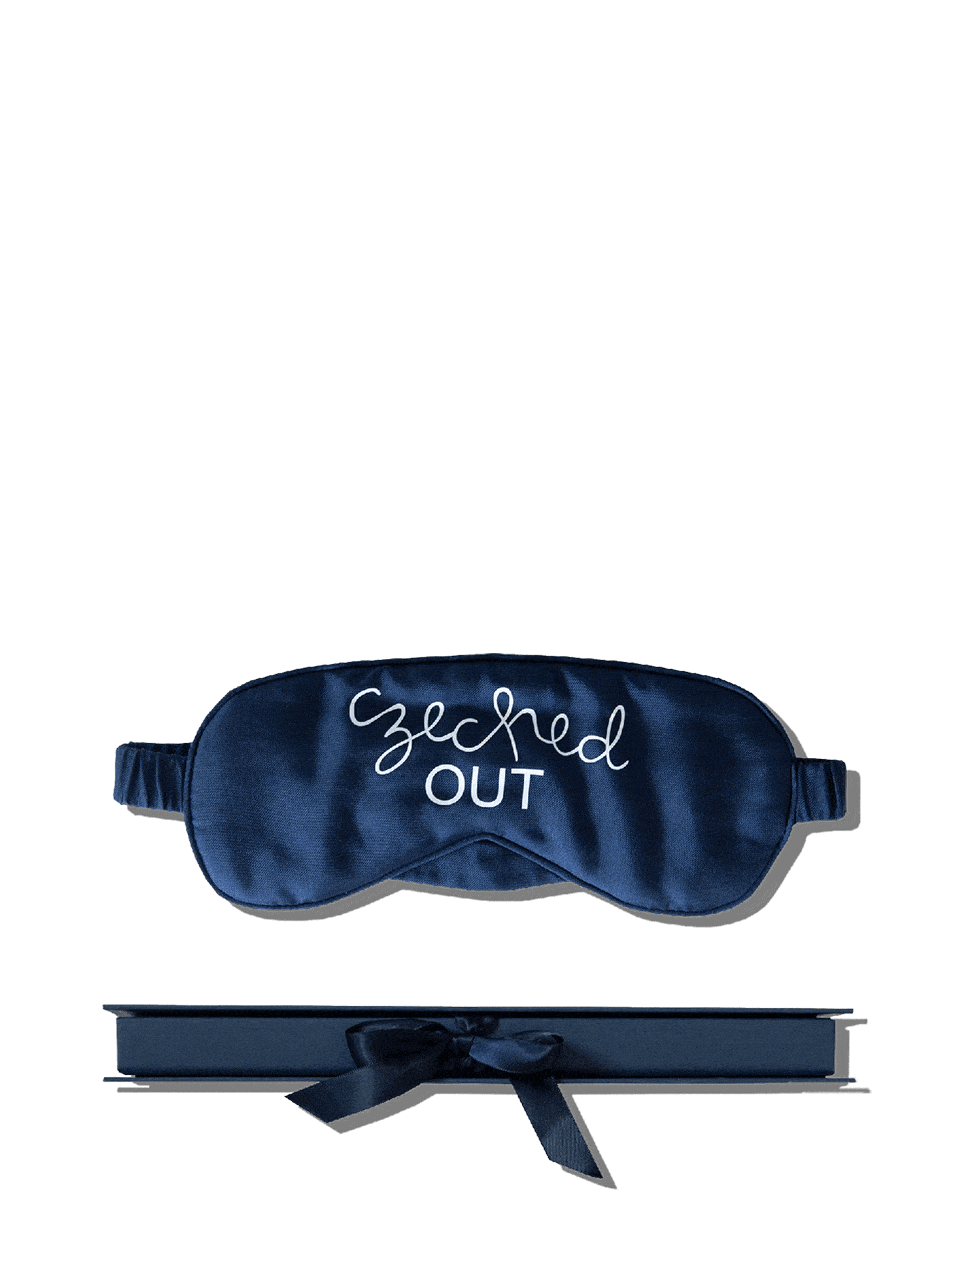 The Limited-Edition 'Czeched Out' Sleep Mask LIFESTYLE Joanna Czech Skincare 